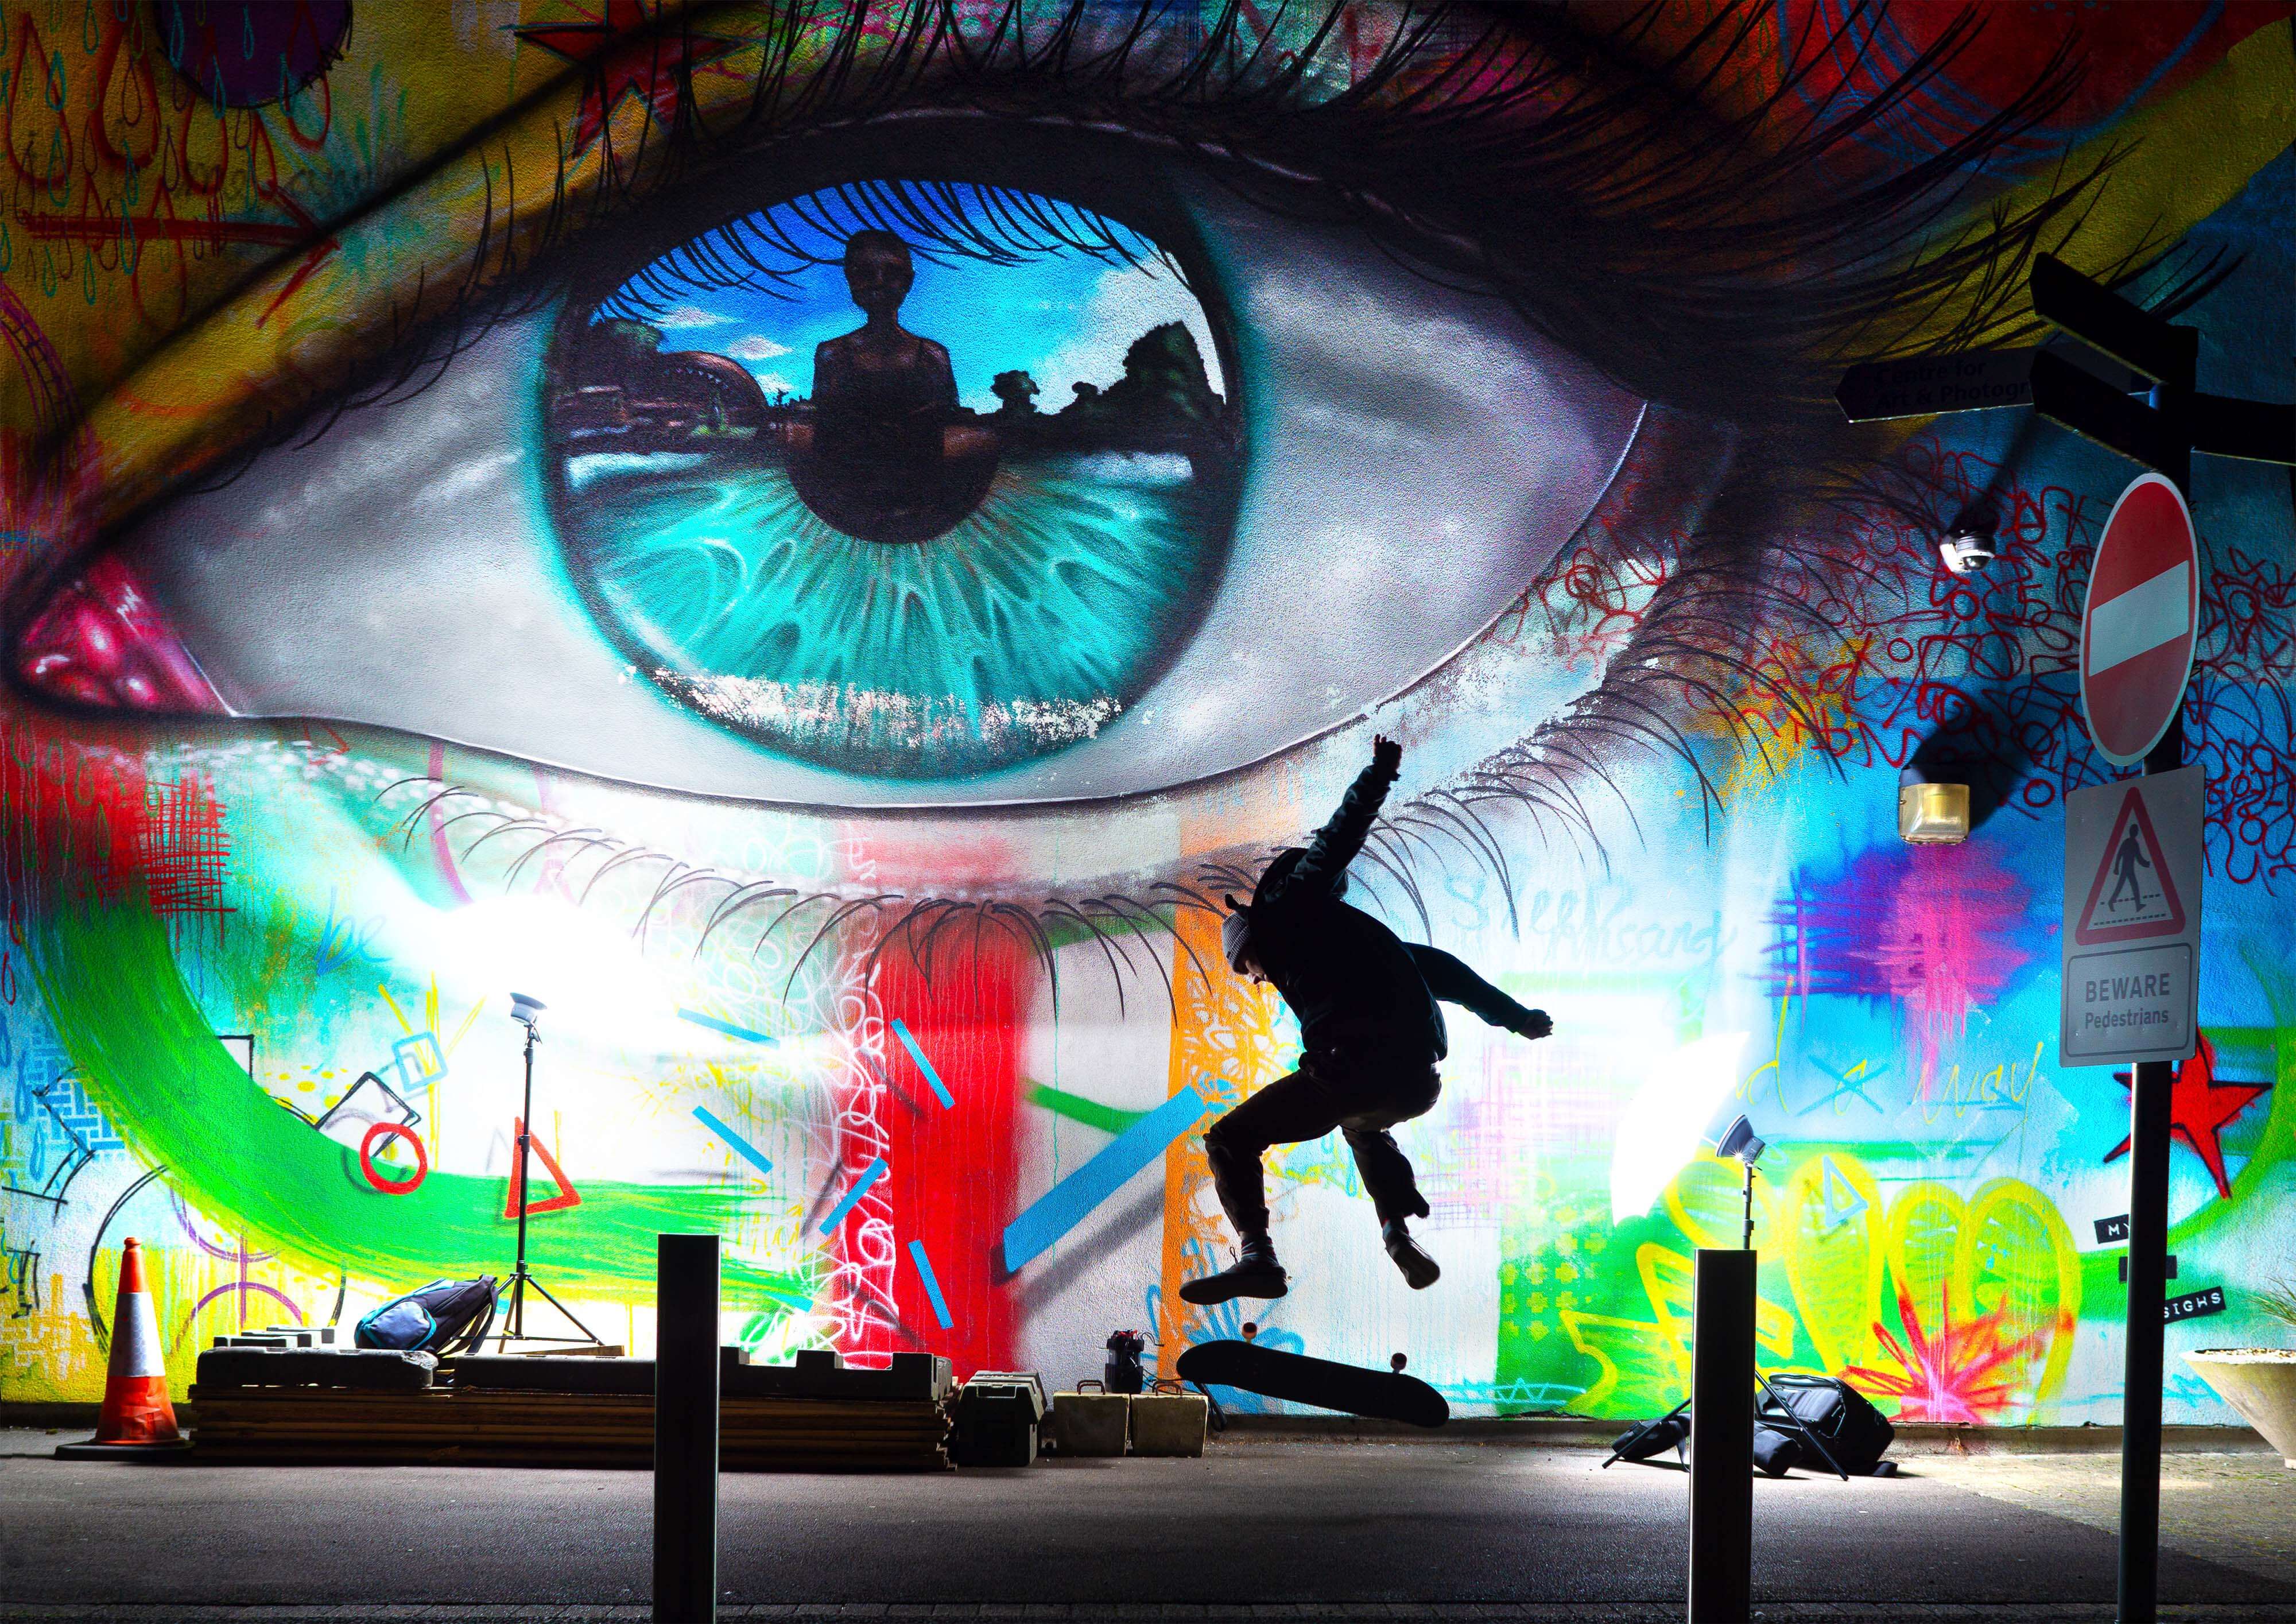 A silhouette image of skateboarder in action in front of colourful mural.